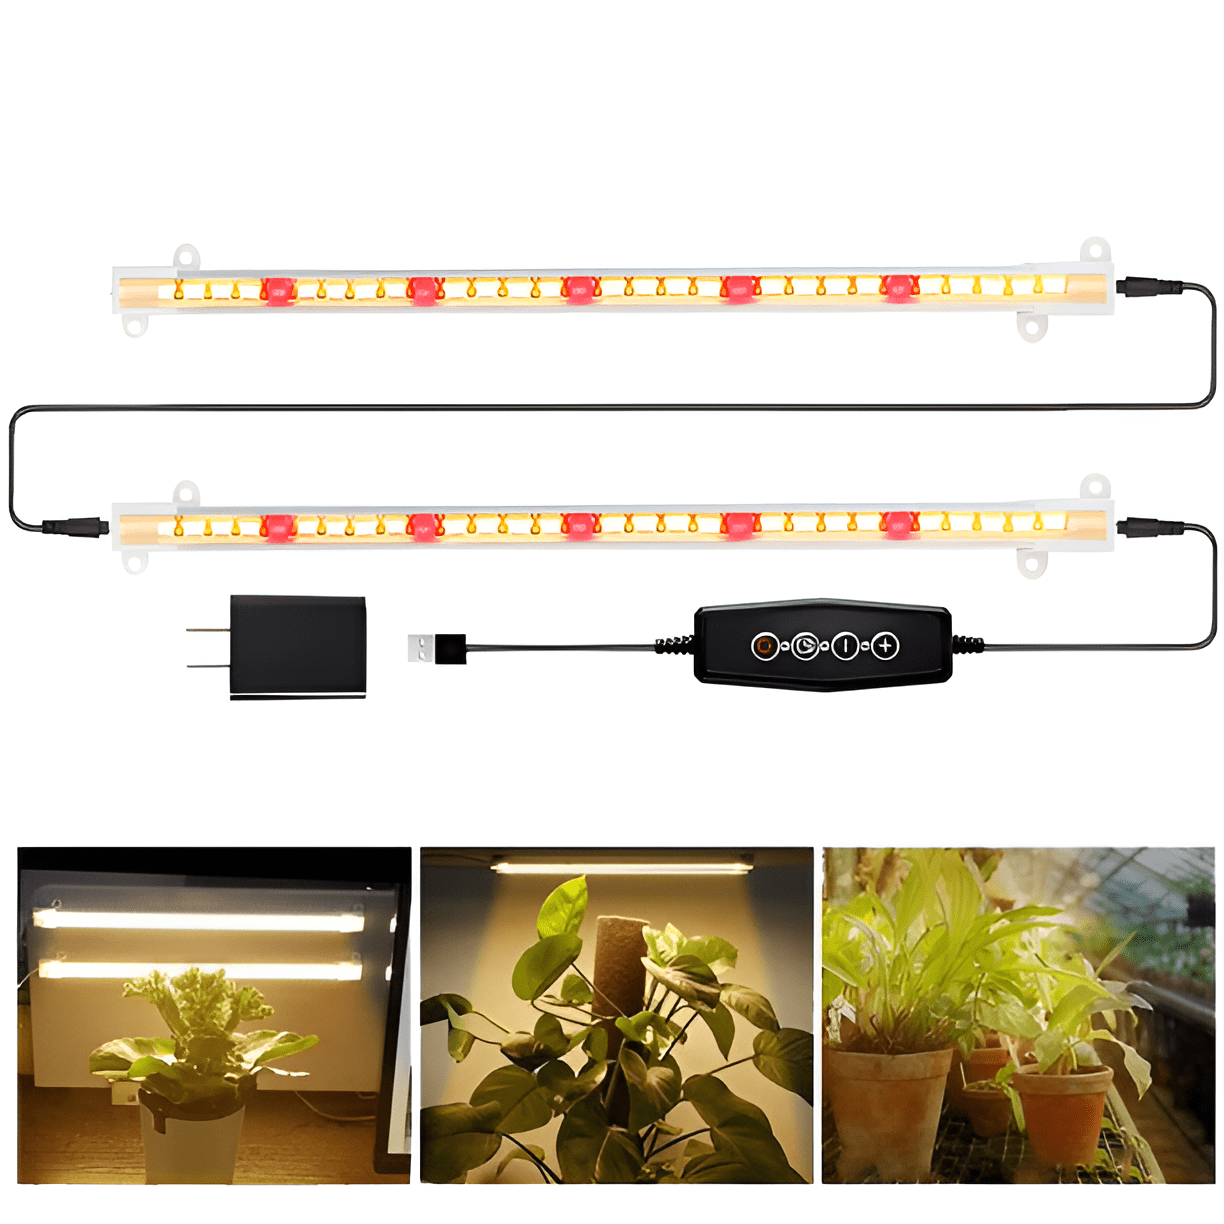 with Auto On/Off 3/6/12H Timer Clip on Grow Lights for Indoor Plants Warm White&White Four Tubes Led Grow Light Strip Fexible Full Spectrum White and Sunlight Warm White Level 10 Dimming Modes for Seeds Succulent Hydroponics 